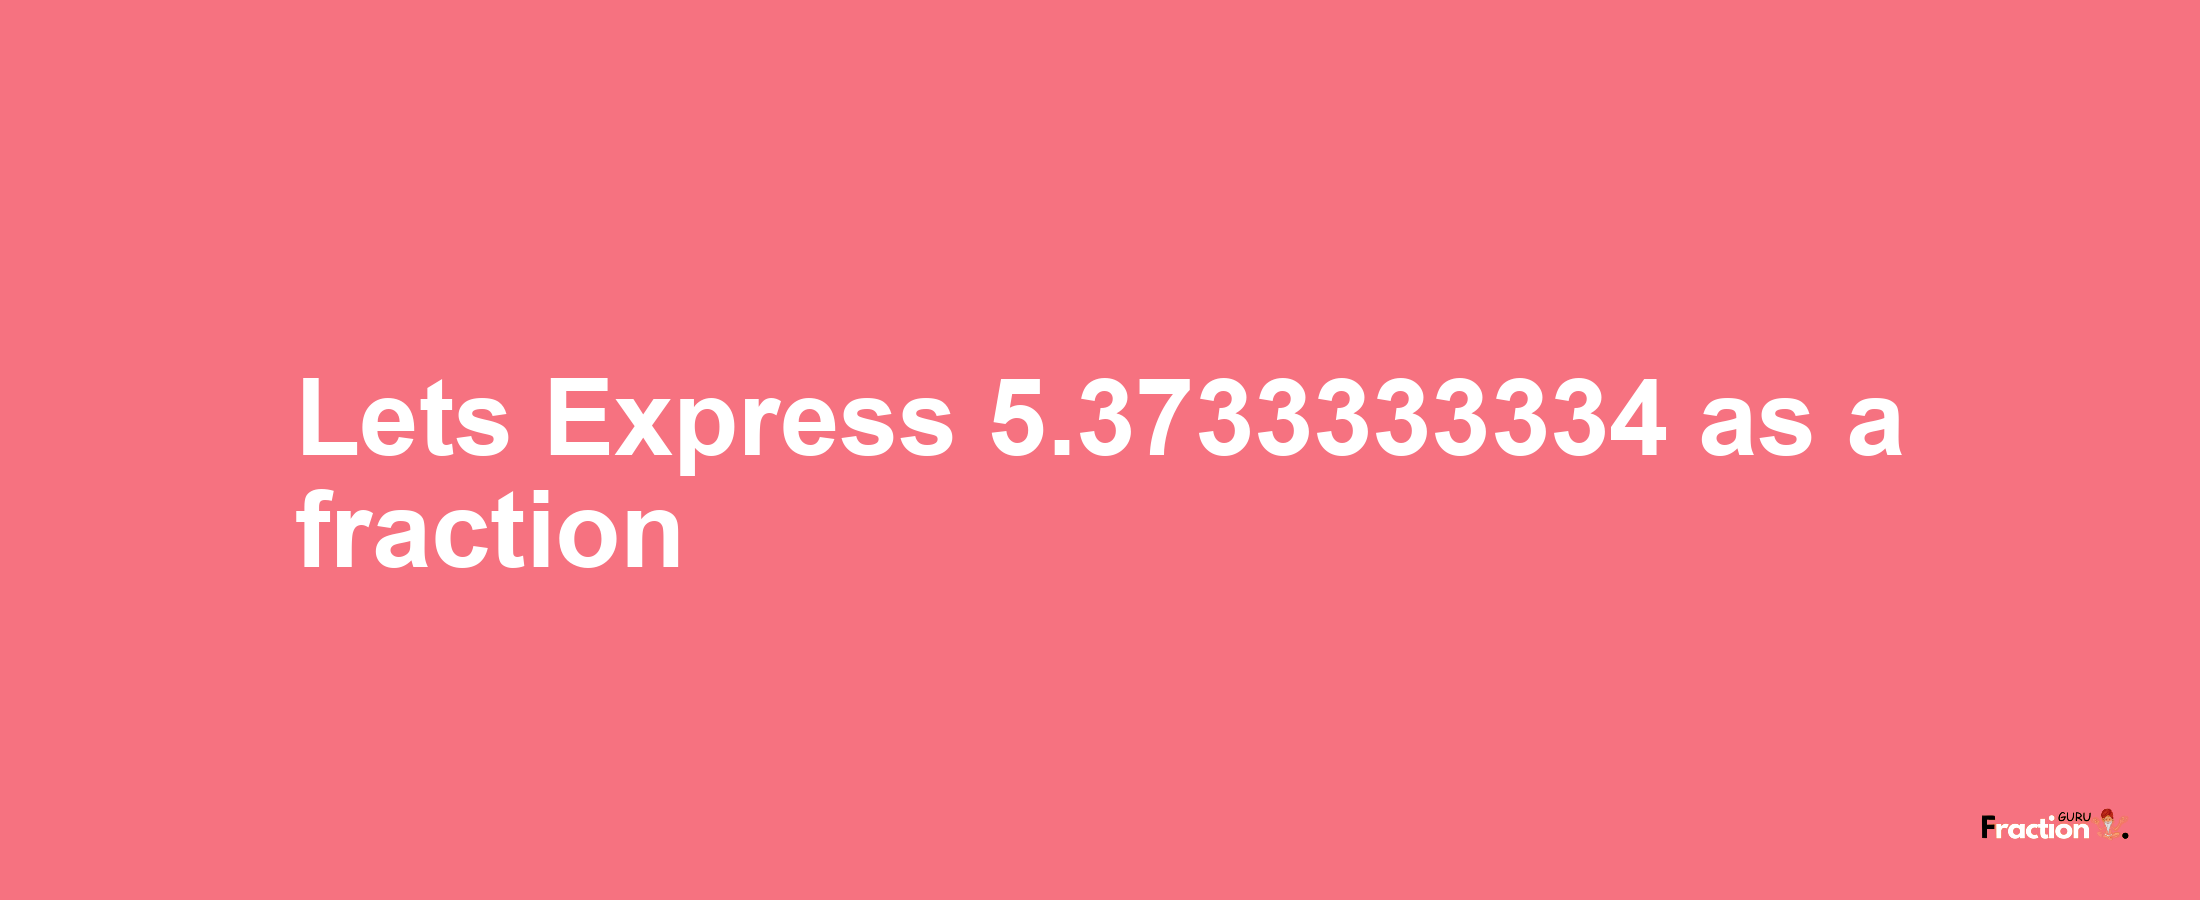 Lets Express 5.3733333334 as afraction